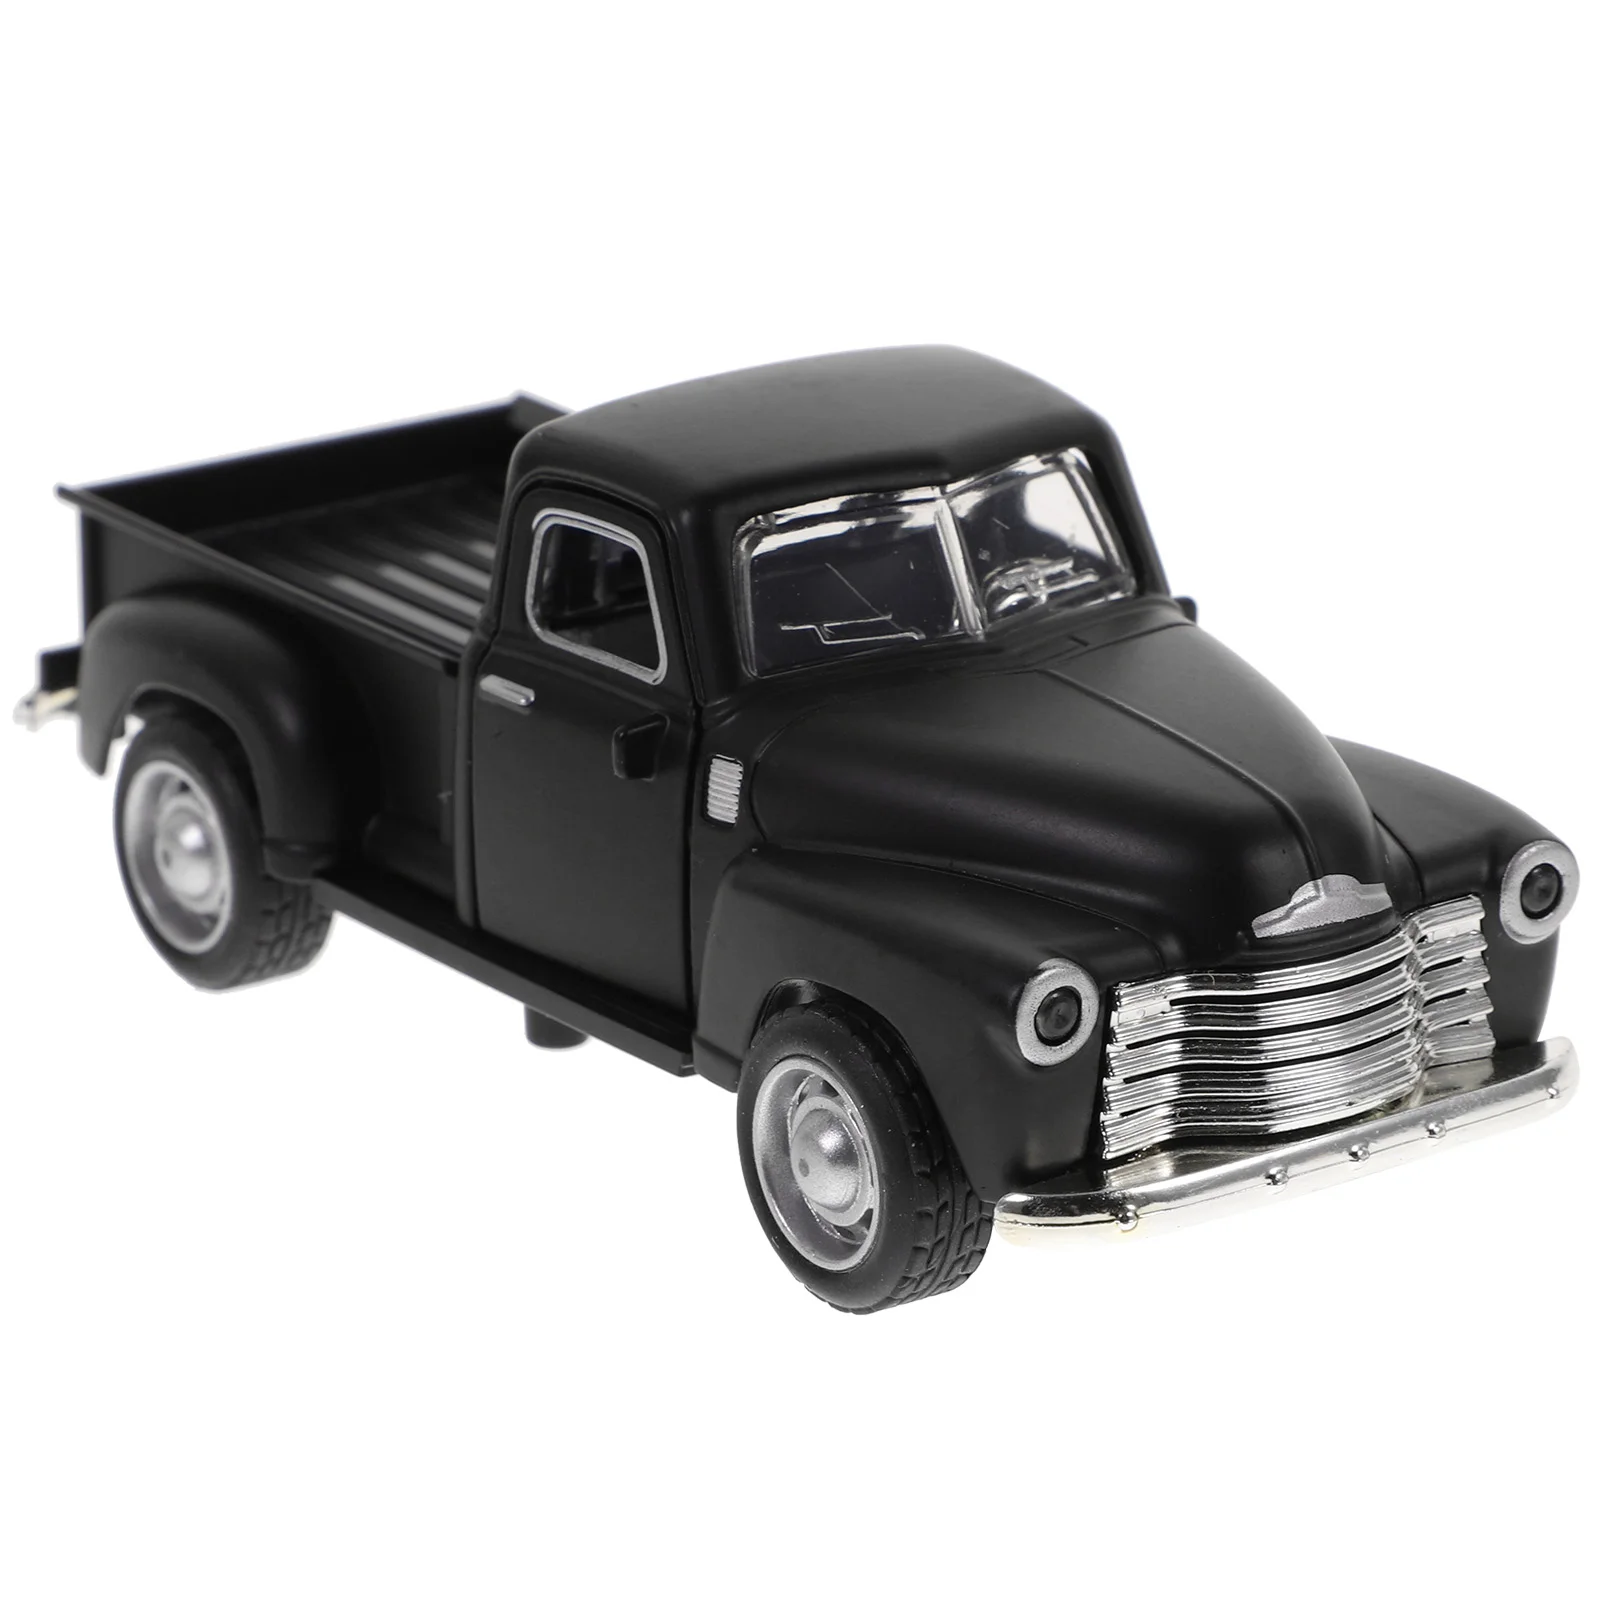 

Truck Car Model Toy Pickup Metal Vintage Cars Decor Diecast Christmas Alloy Retro Toys Figurine Classic Vehicle Up Old Pick Red